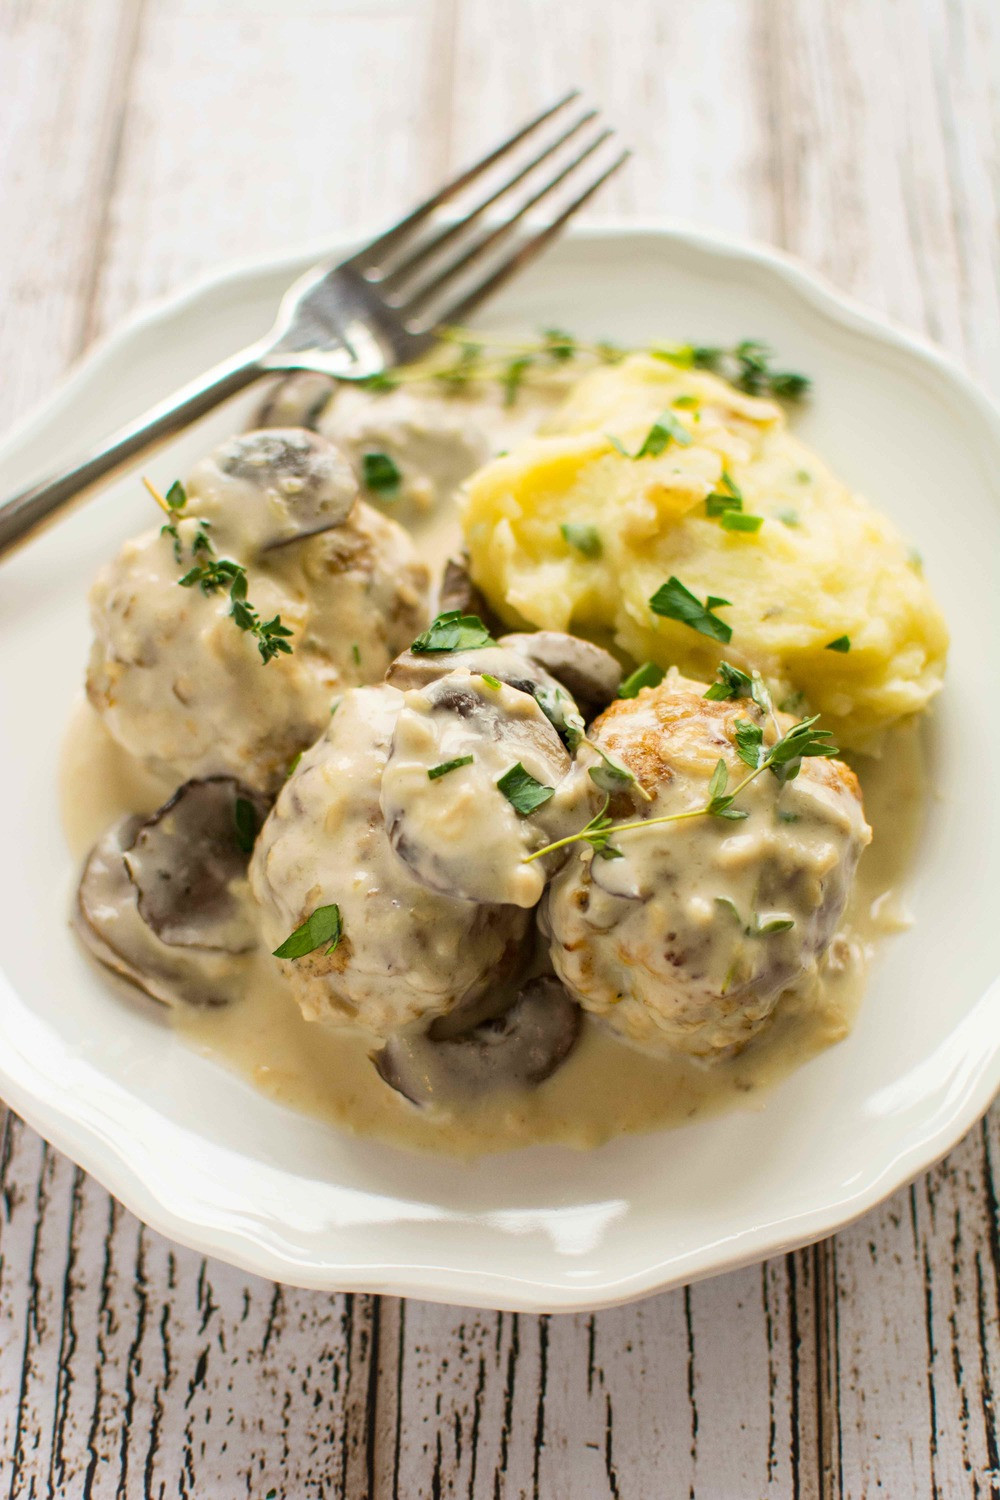 Slow Cooker Meatballs And Gravy
 forting Chicken Meatballs with Gravy